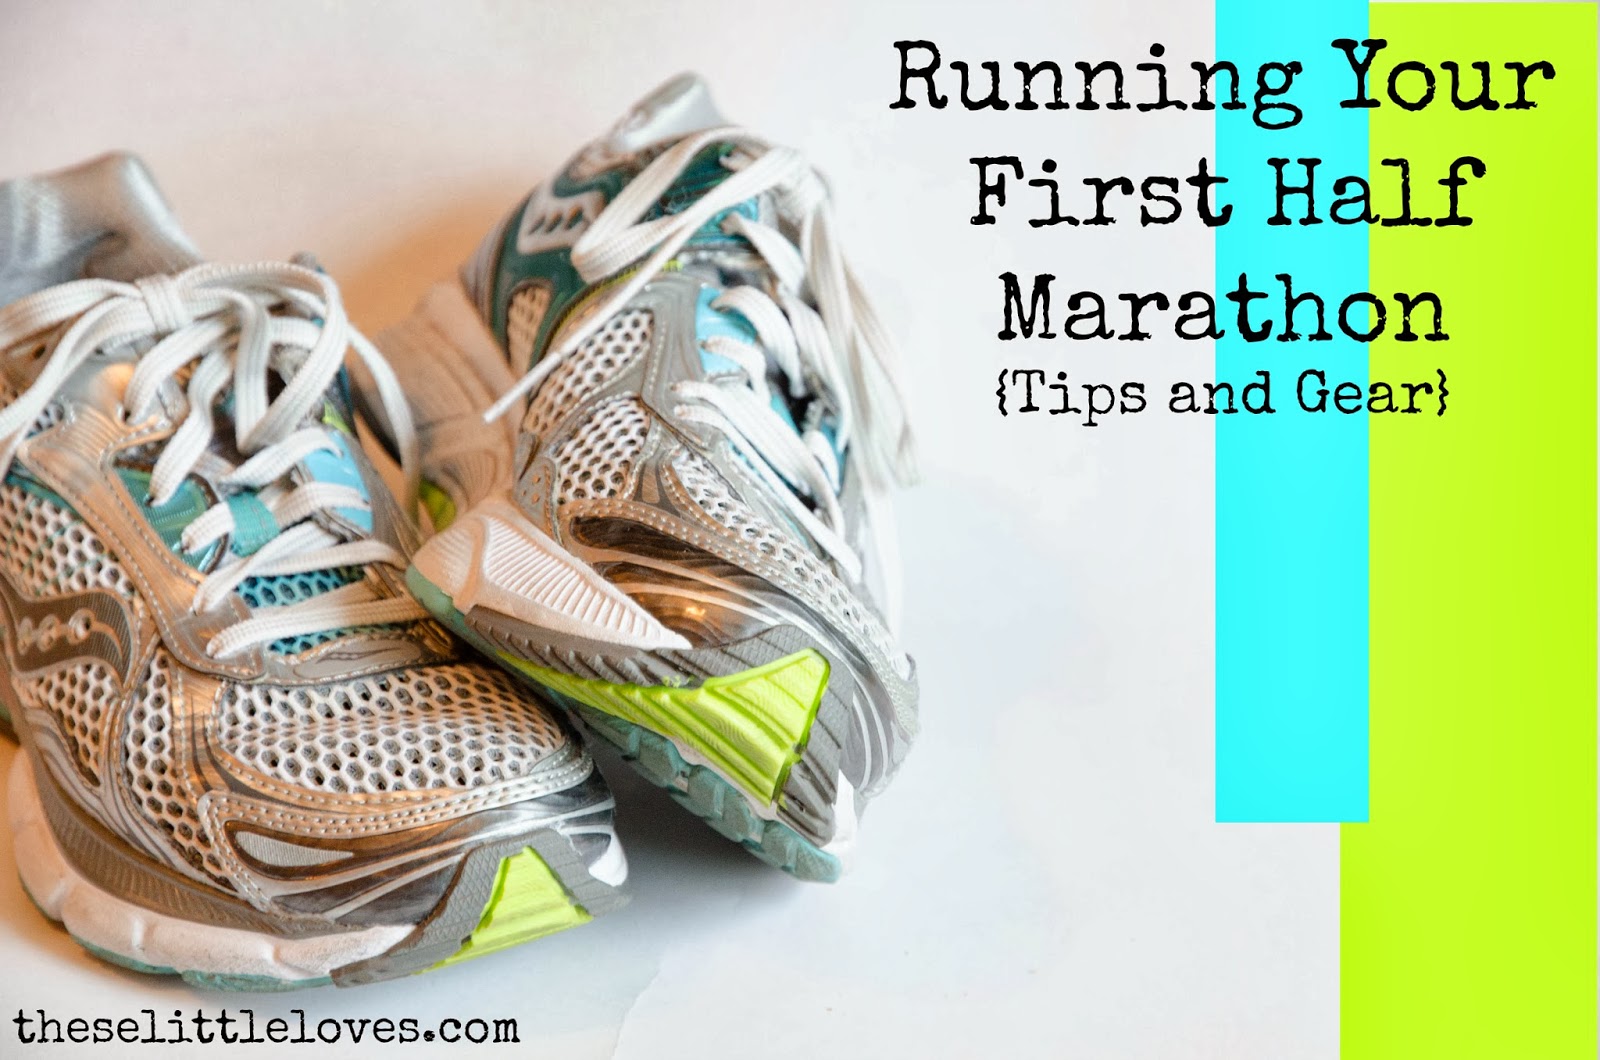 Tips and Gear for Your First Half Marathon